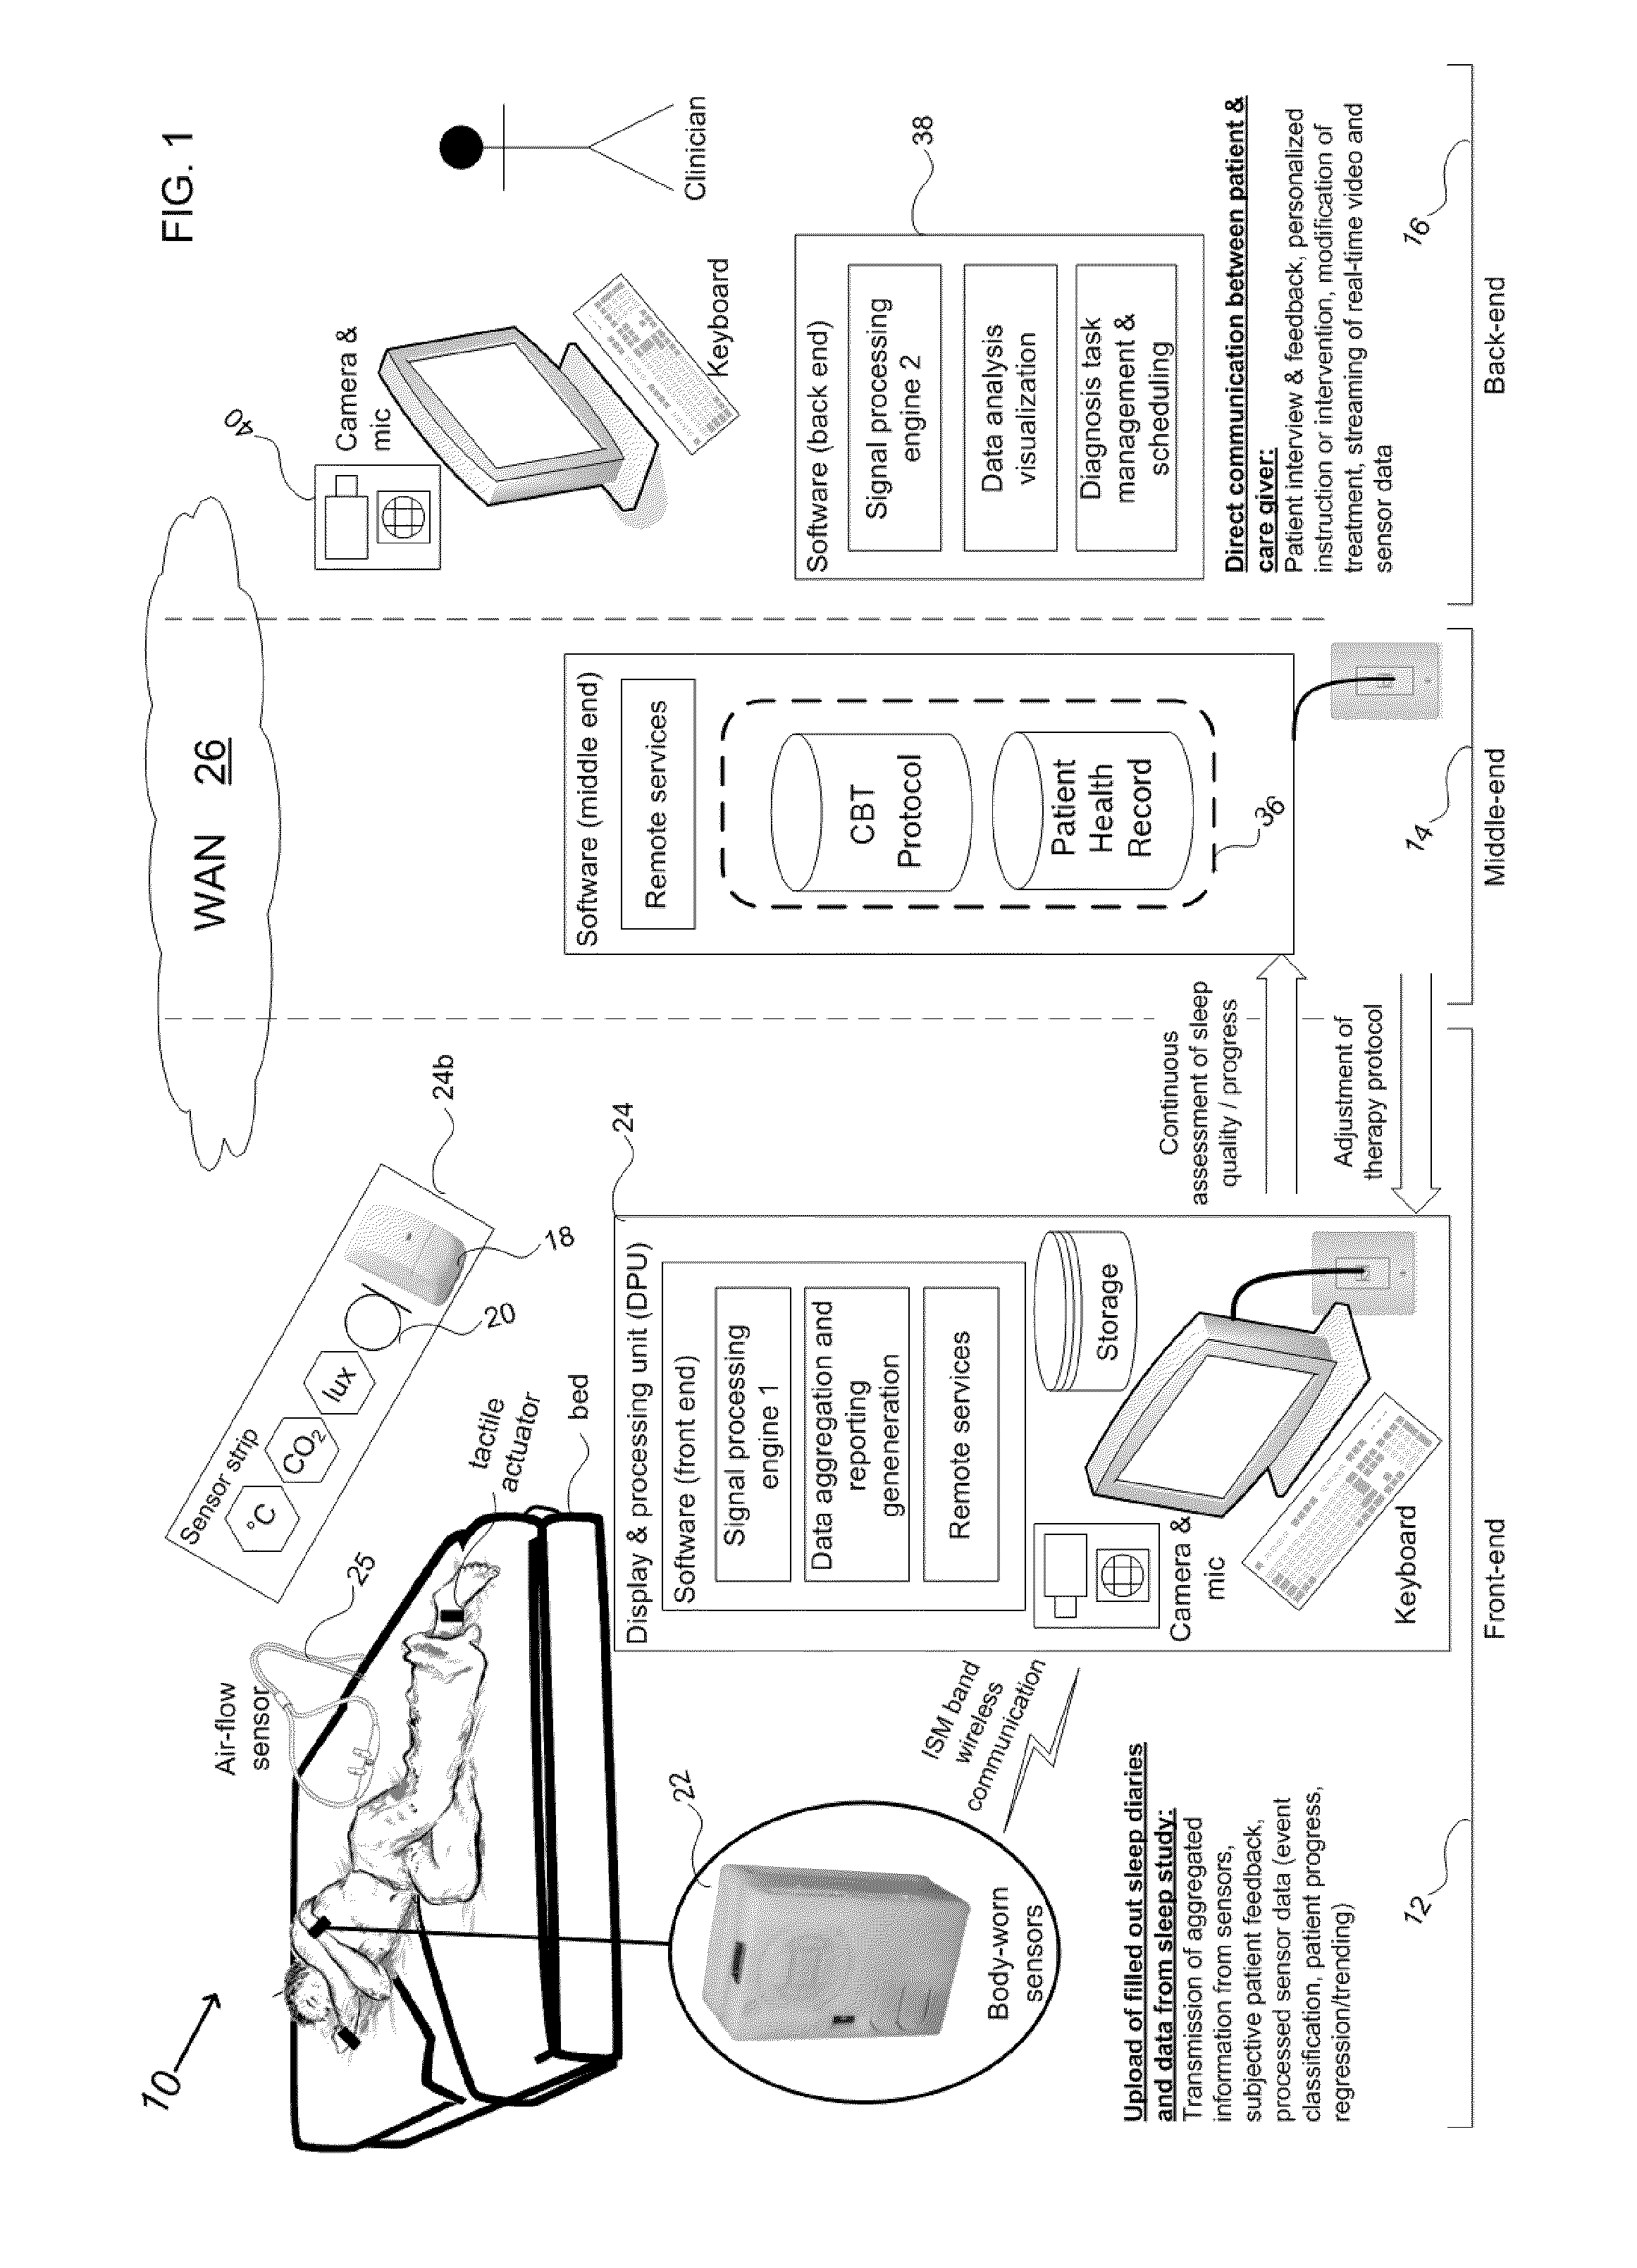 Device and method to monitor, assess and improve quality of sleep